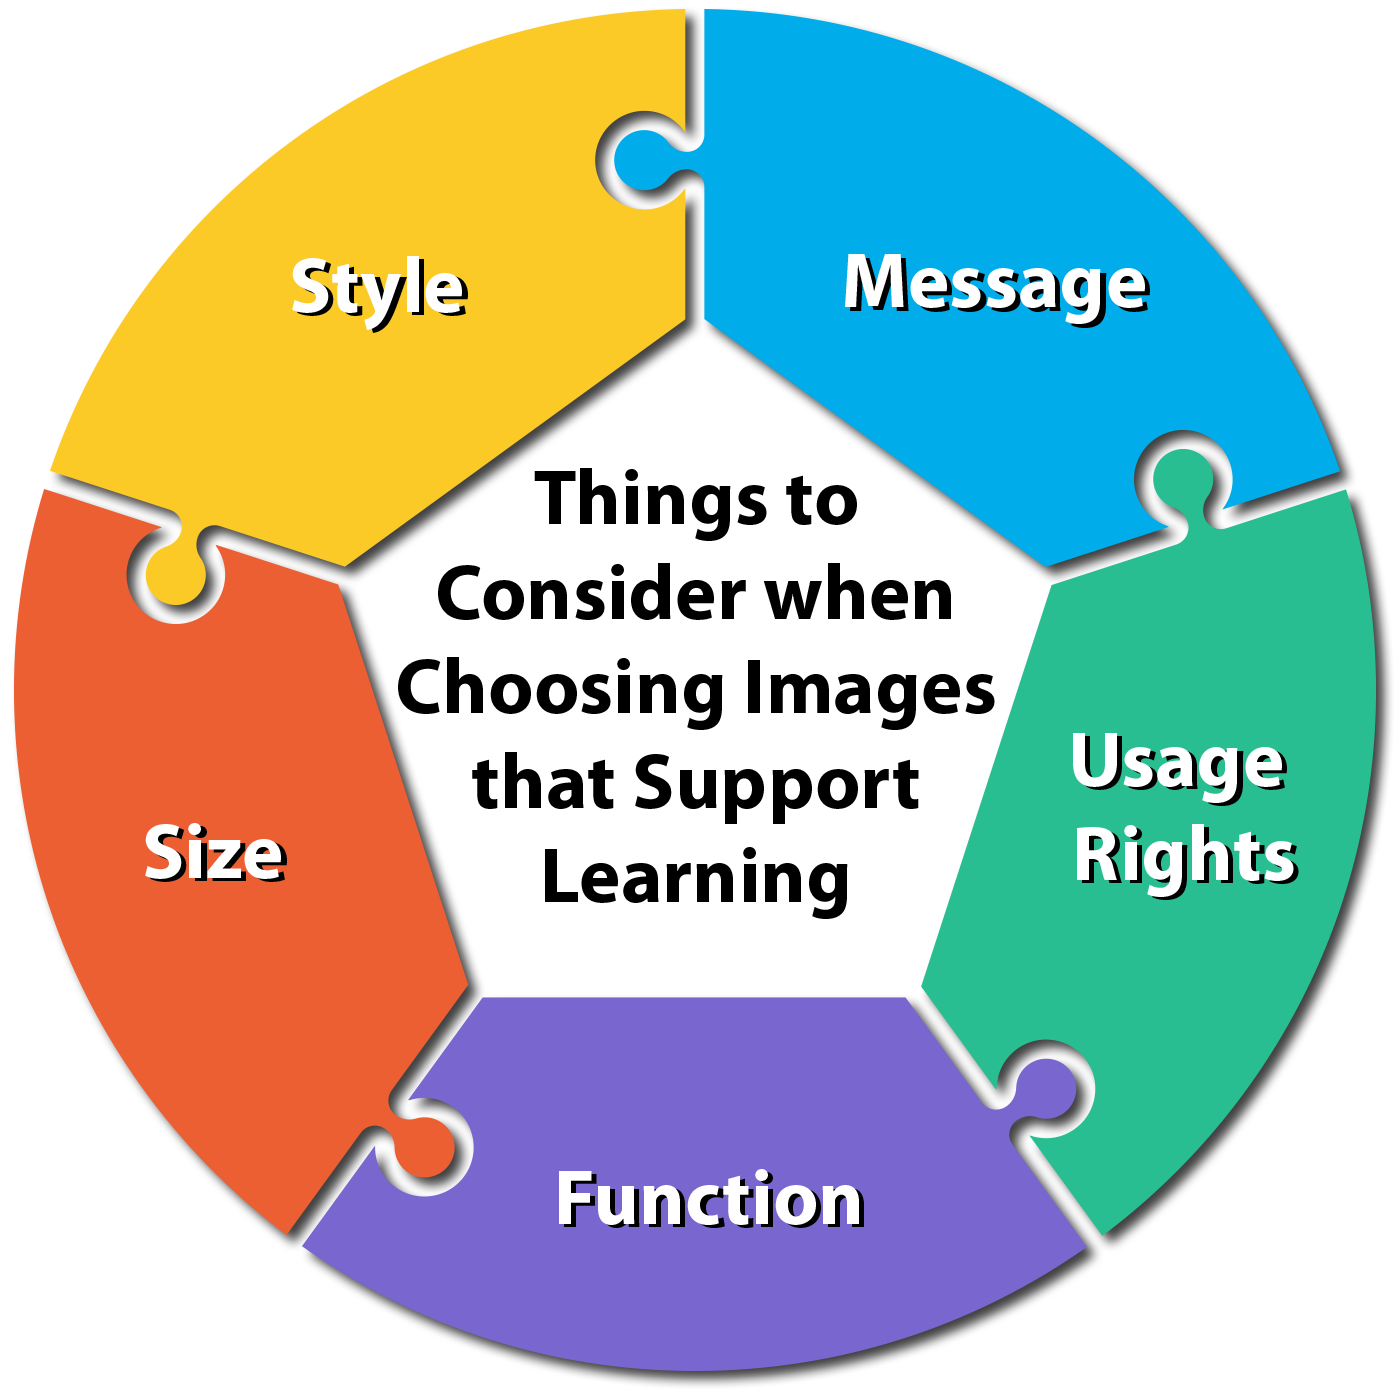 Infographic depicting 5 things to consider when choosing images: Function, Size, Message, Style and Usage Rights